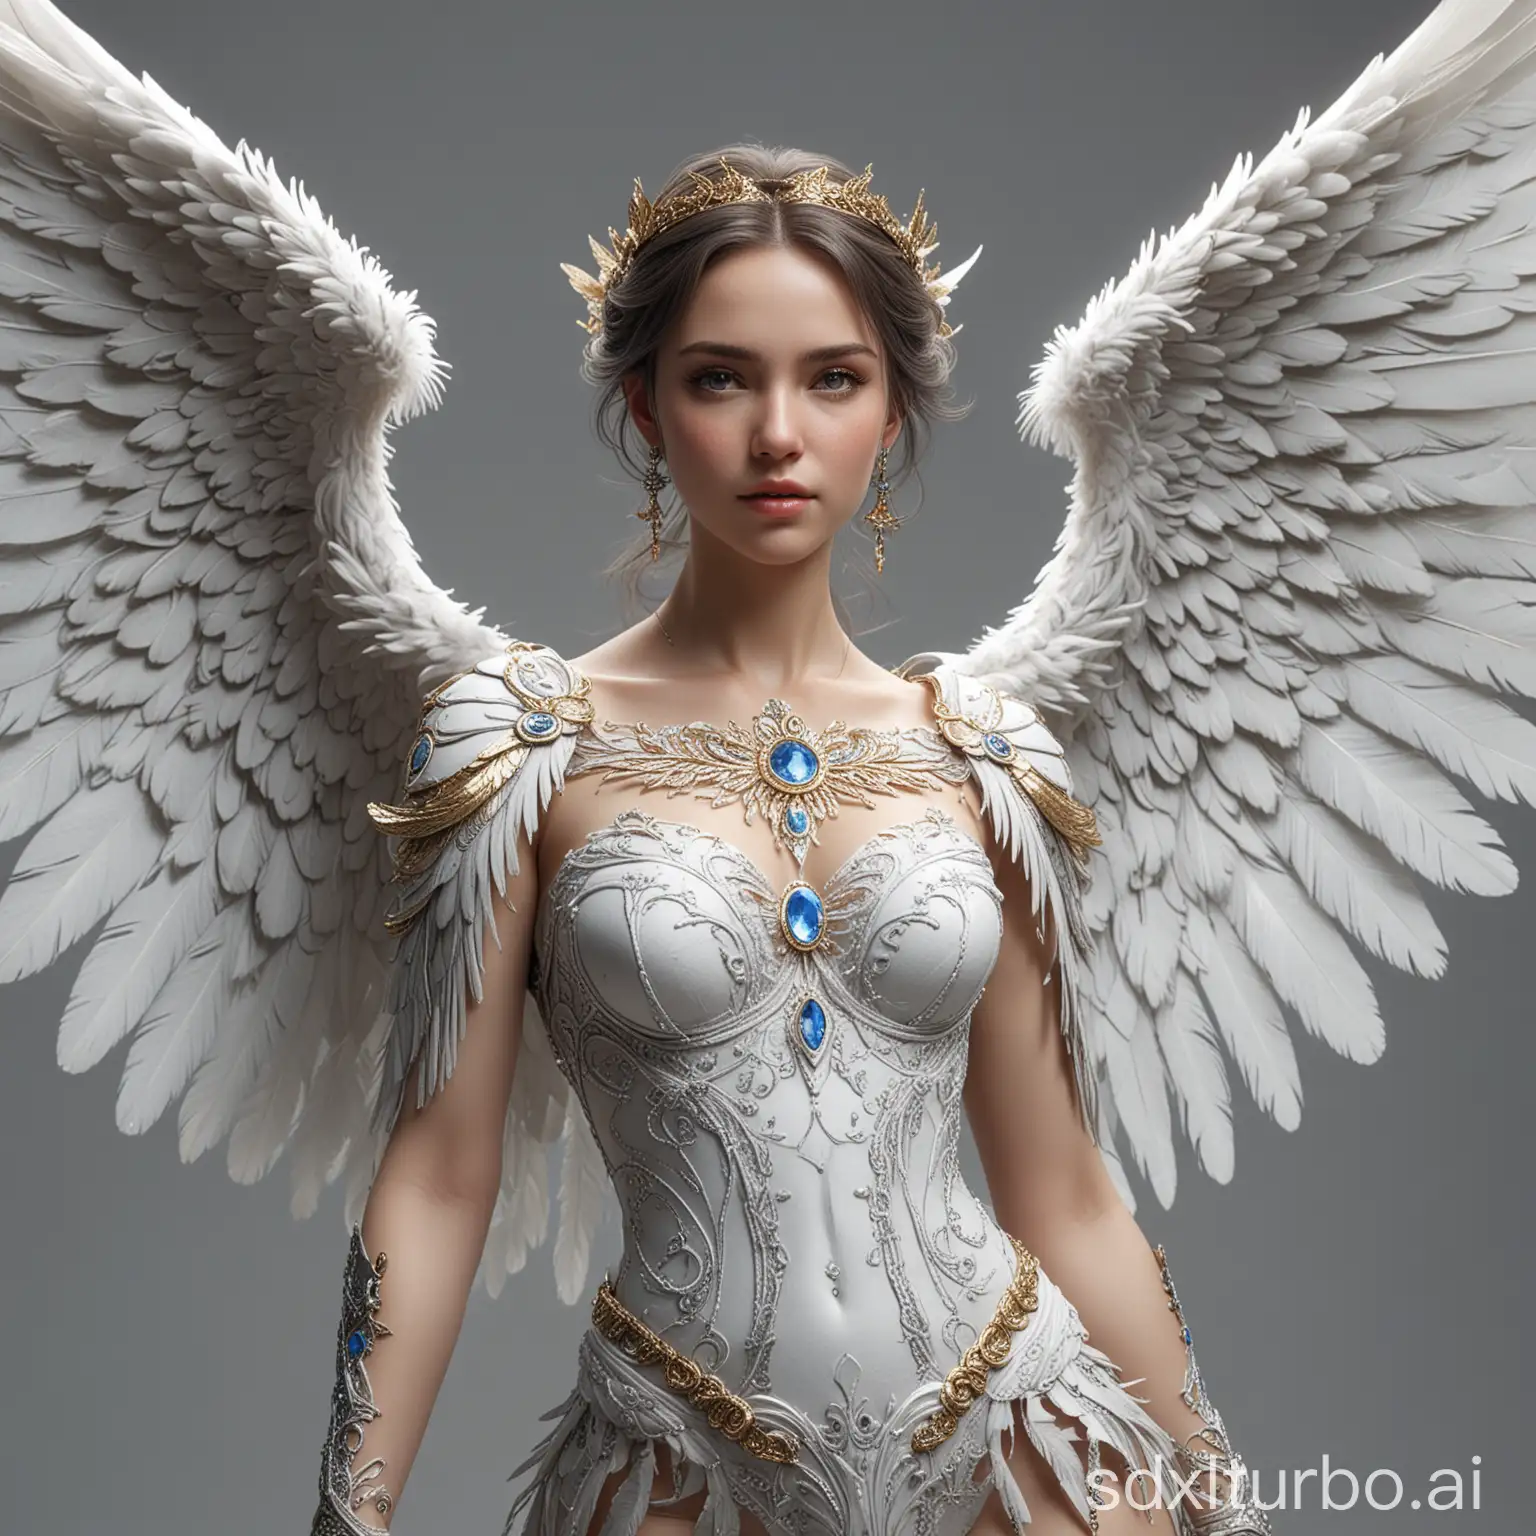 RAW Photo of a detailed magnificent angel with wings  in a full-bodyLong shot from 15-meter distance with clean hands & fingers putting high hills shoes & shining gems on wings tips from a distance that full body and wings are visible, with sharp focus , clear big blue catchy eyes, detailed face and skin texture,wings outstretched with gold & silver  tips on feathers, intricate ornate marble, and bone interwoven and spiraling patterns, final fantasy style,super beautiful ggoddess wearing translucent  great at both photos and artistic feathered 8k, high resolution, detailed, realistic lighting, focus on hands/face, painterly, strong composition, award-winning with simple white background